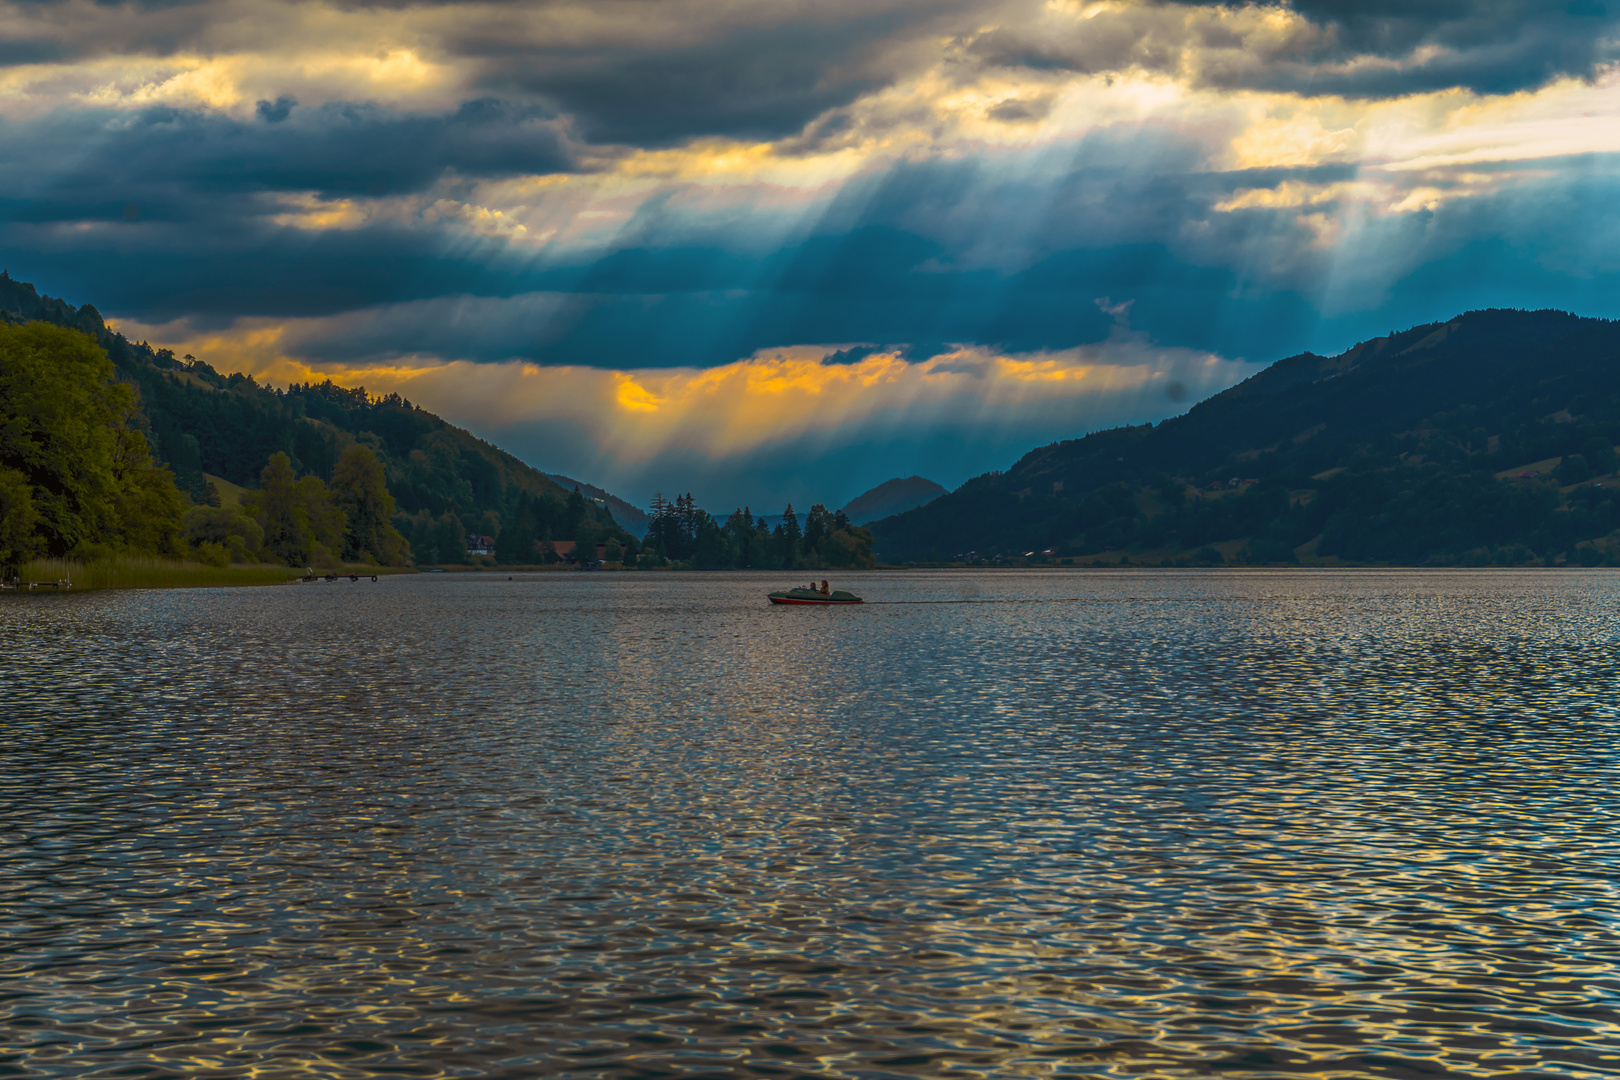 Sunlight over the mountains - Alpsee